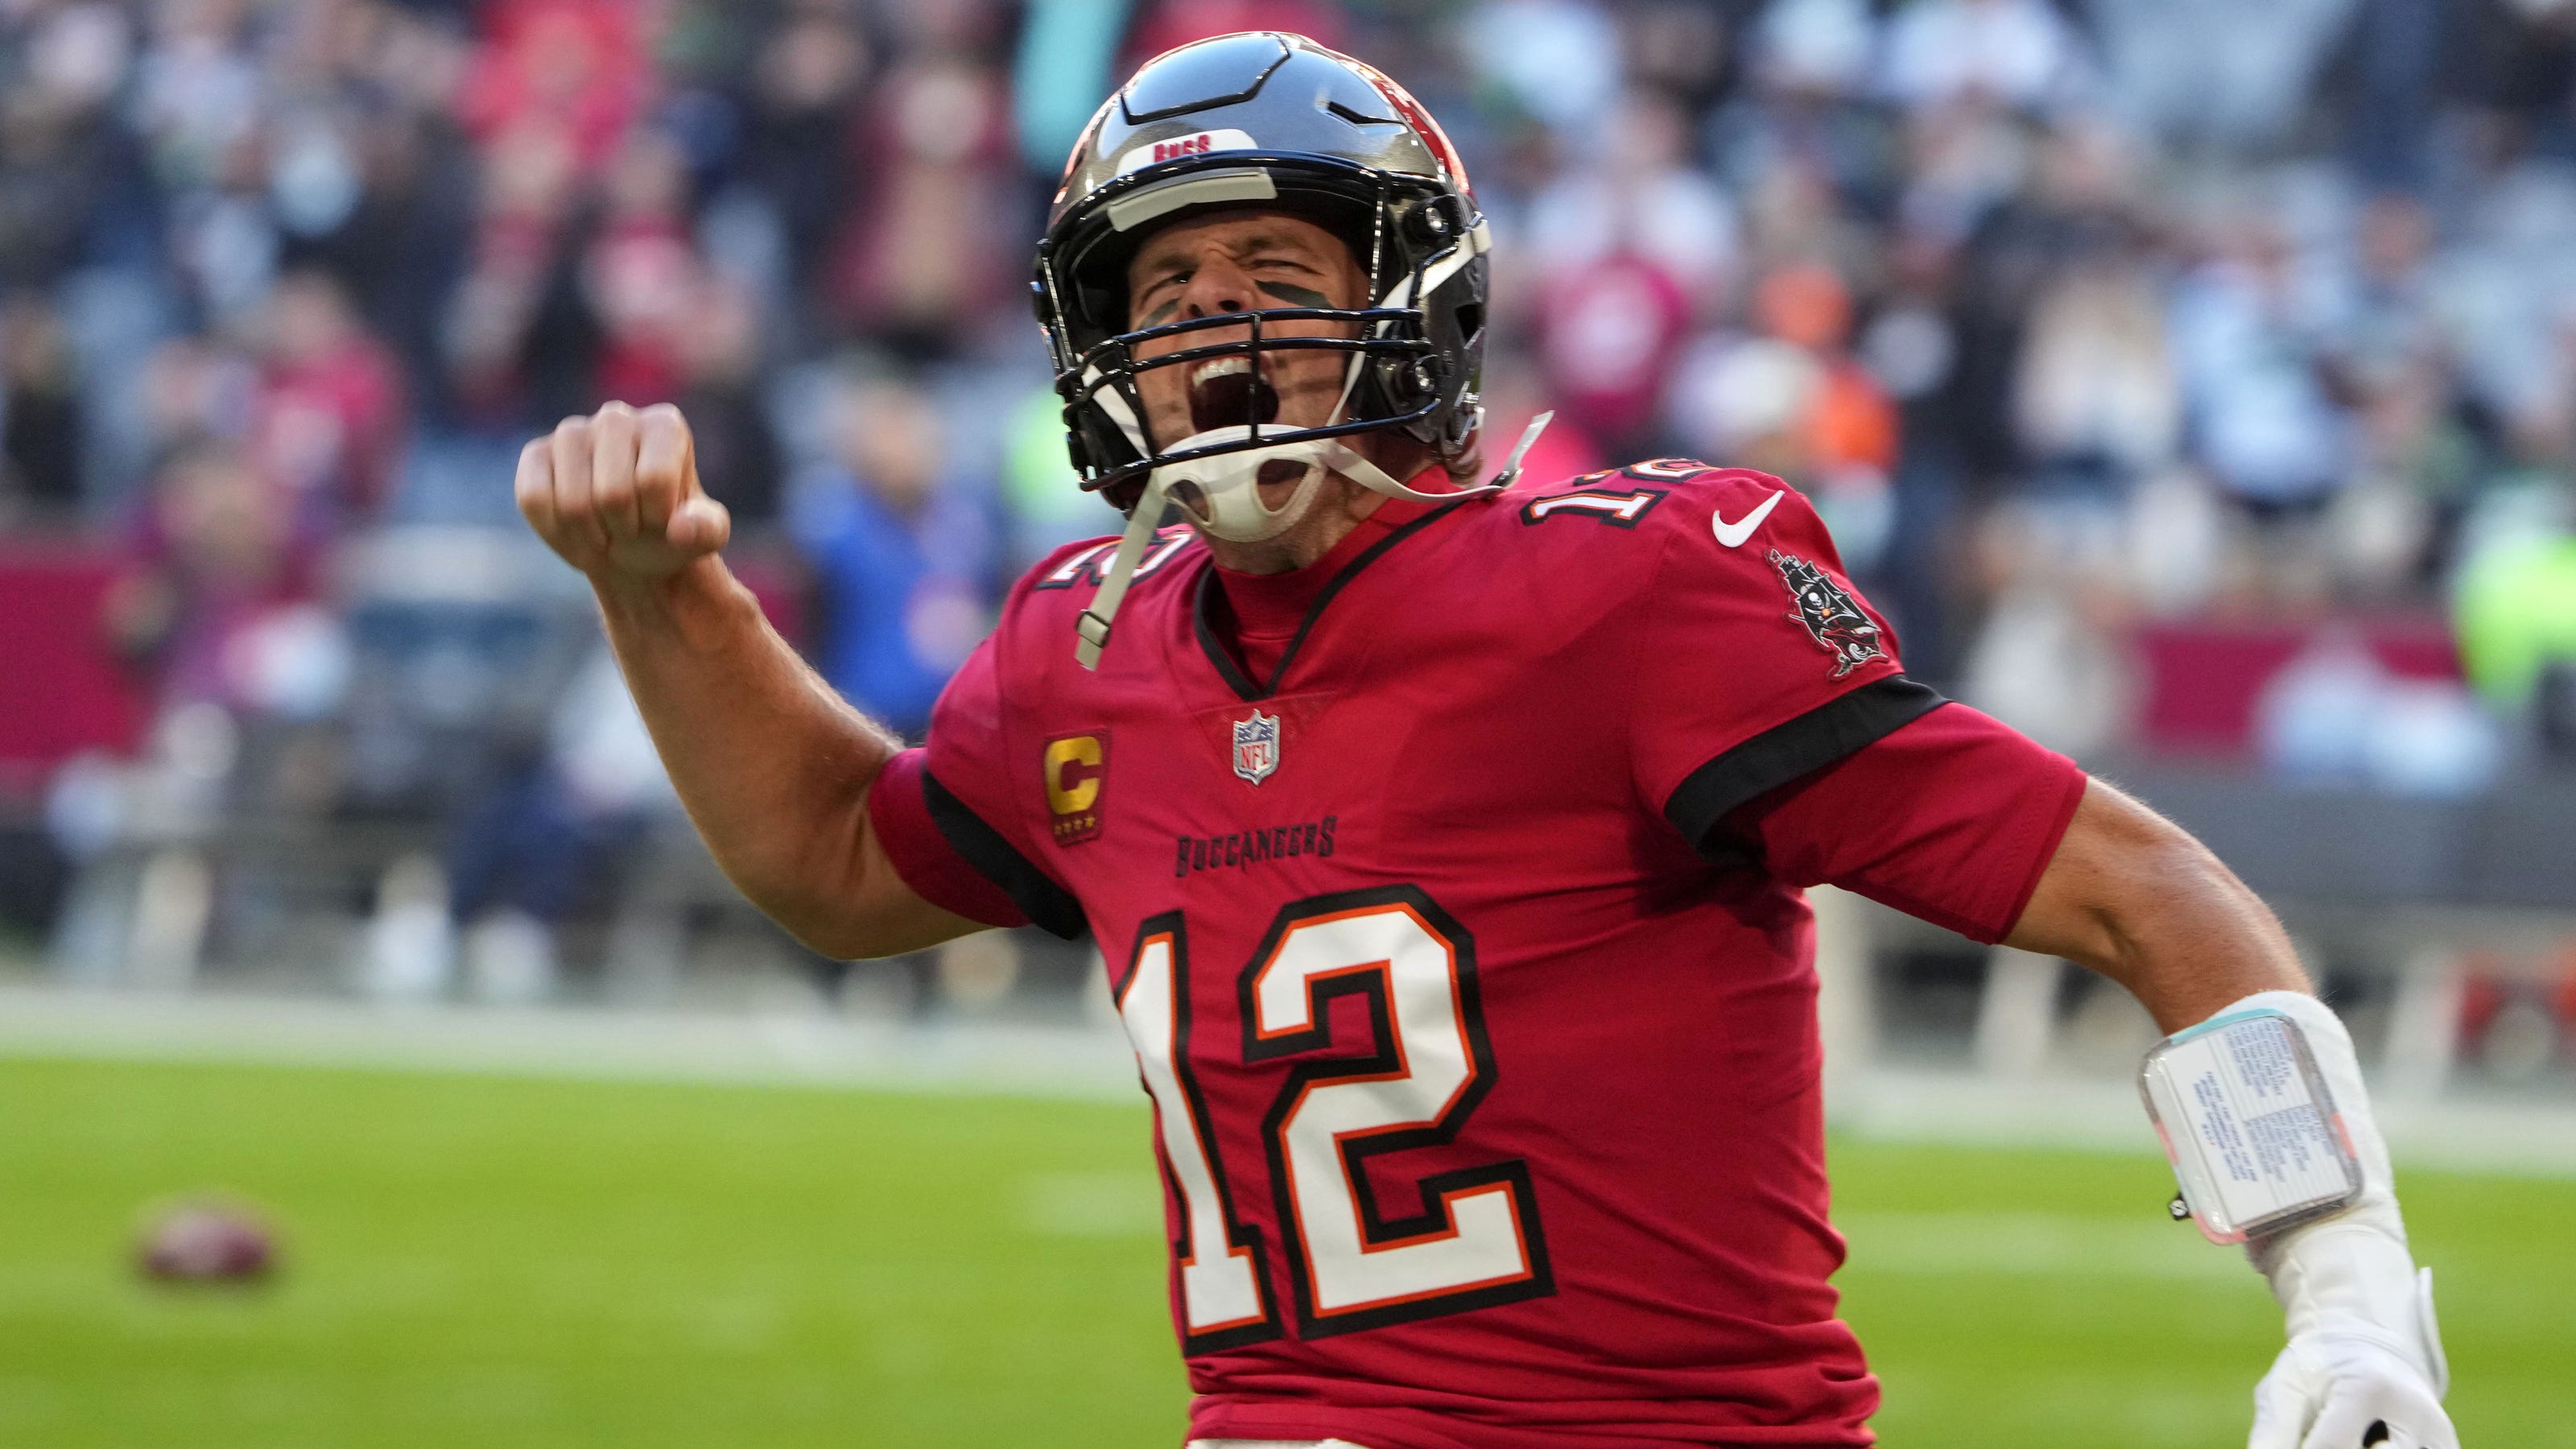 New Orleans Saints at Tampa Bay Buccaneers: Predictions, picks and odds for NFL Week 13 matchup